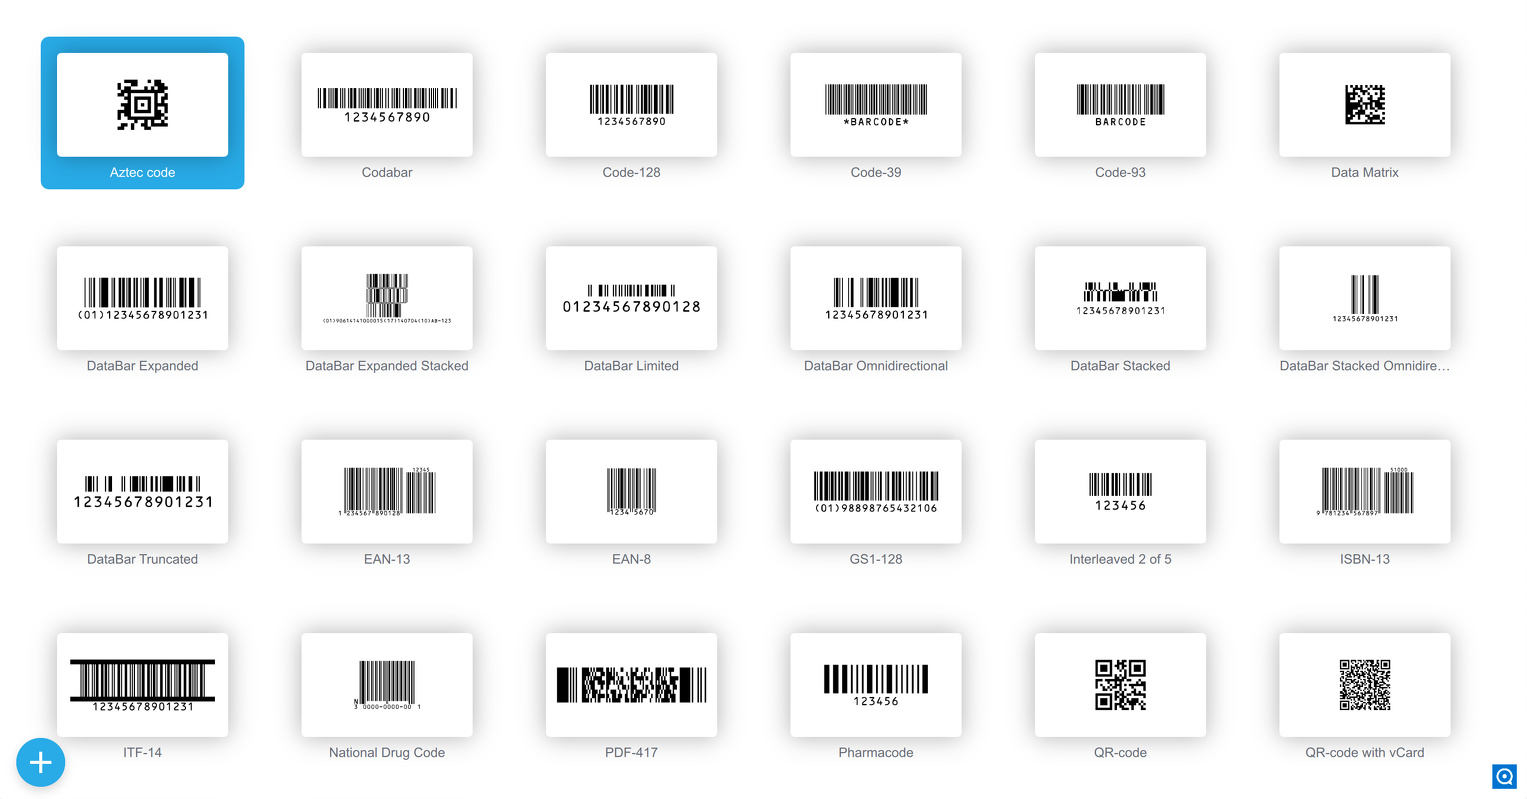 Barcode 1.1 beta : Barcode symbols supported by the barcode generator